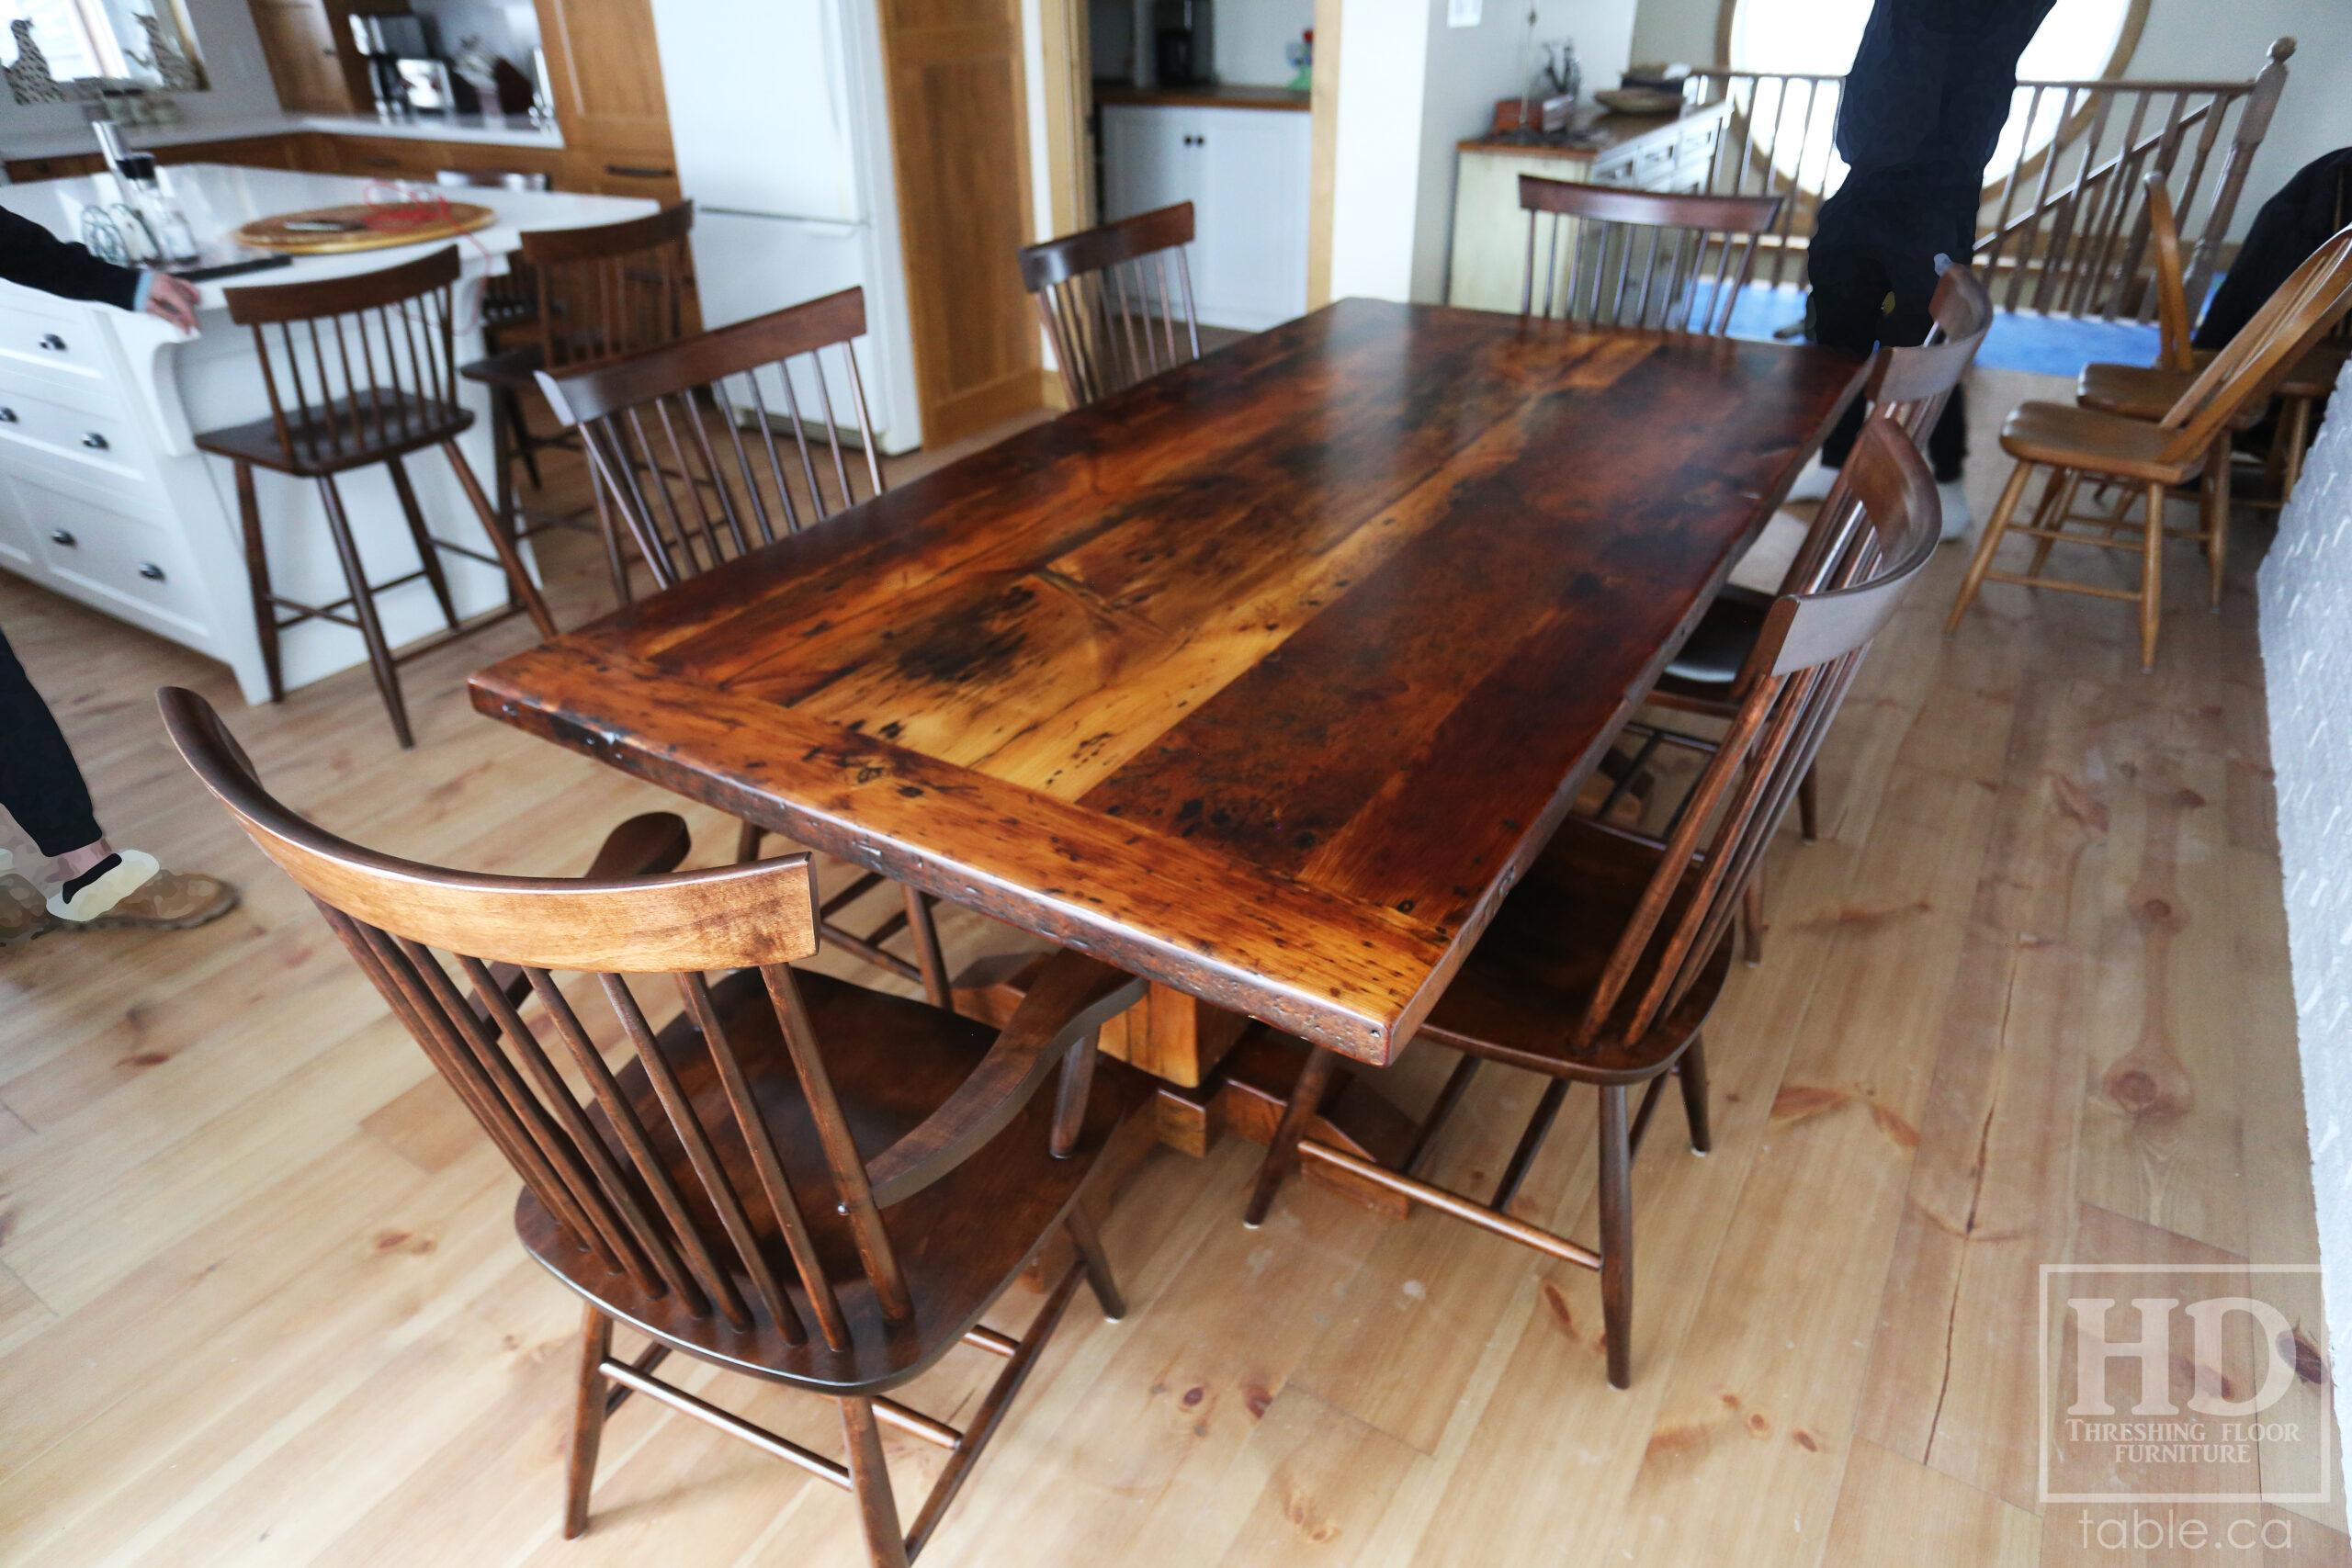 7' Reclaimed Ontario Barnwood Pedestal Table we made for a Bala home - Hand Hewn Posts Base - Old Growth Pine Threshing Floor Construction - Original edges & distressing maintained - Premium epoxy + satin polyurethane finish - [6] Shaker Chairs / Wormy Maple - [3] Shaker Stools - www.table.ca